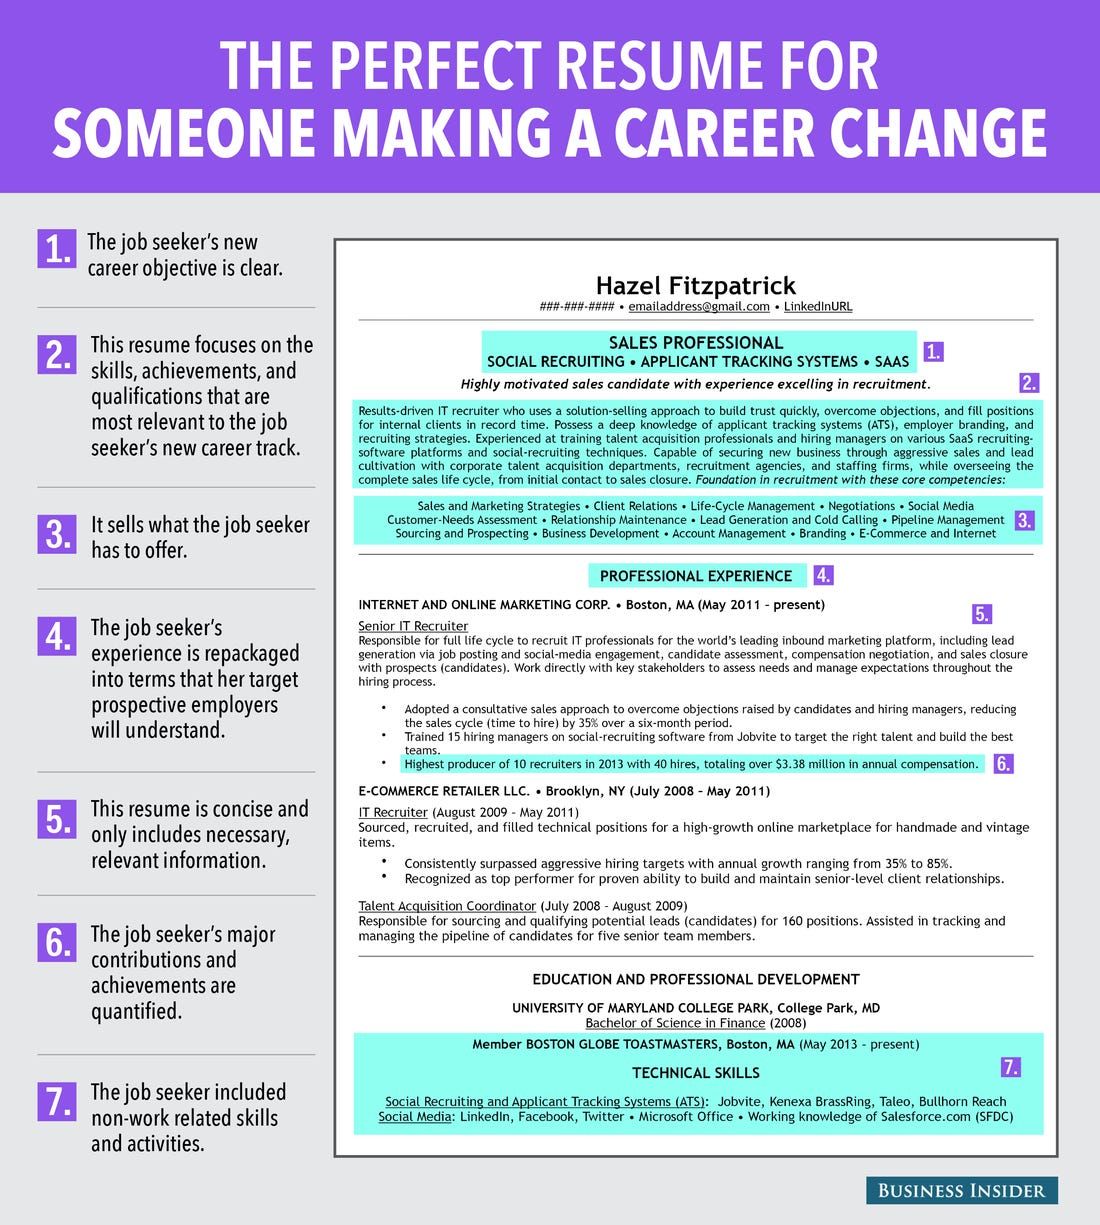 7 Reasons This Is An Excellent Resume For Someone Making A ...